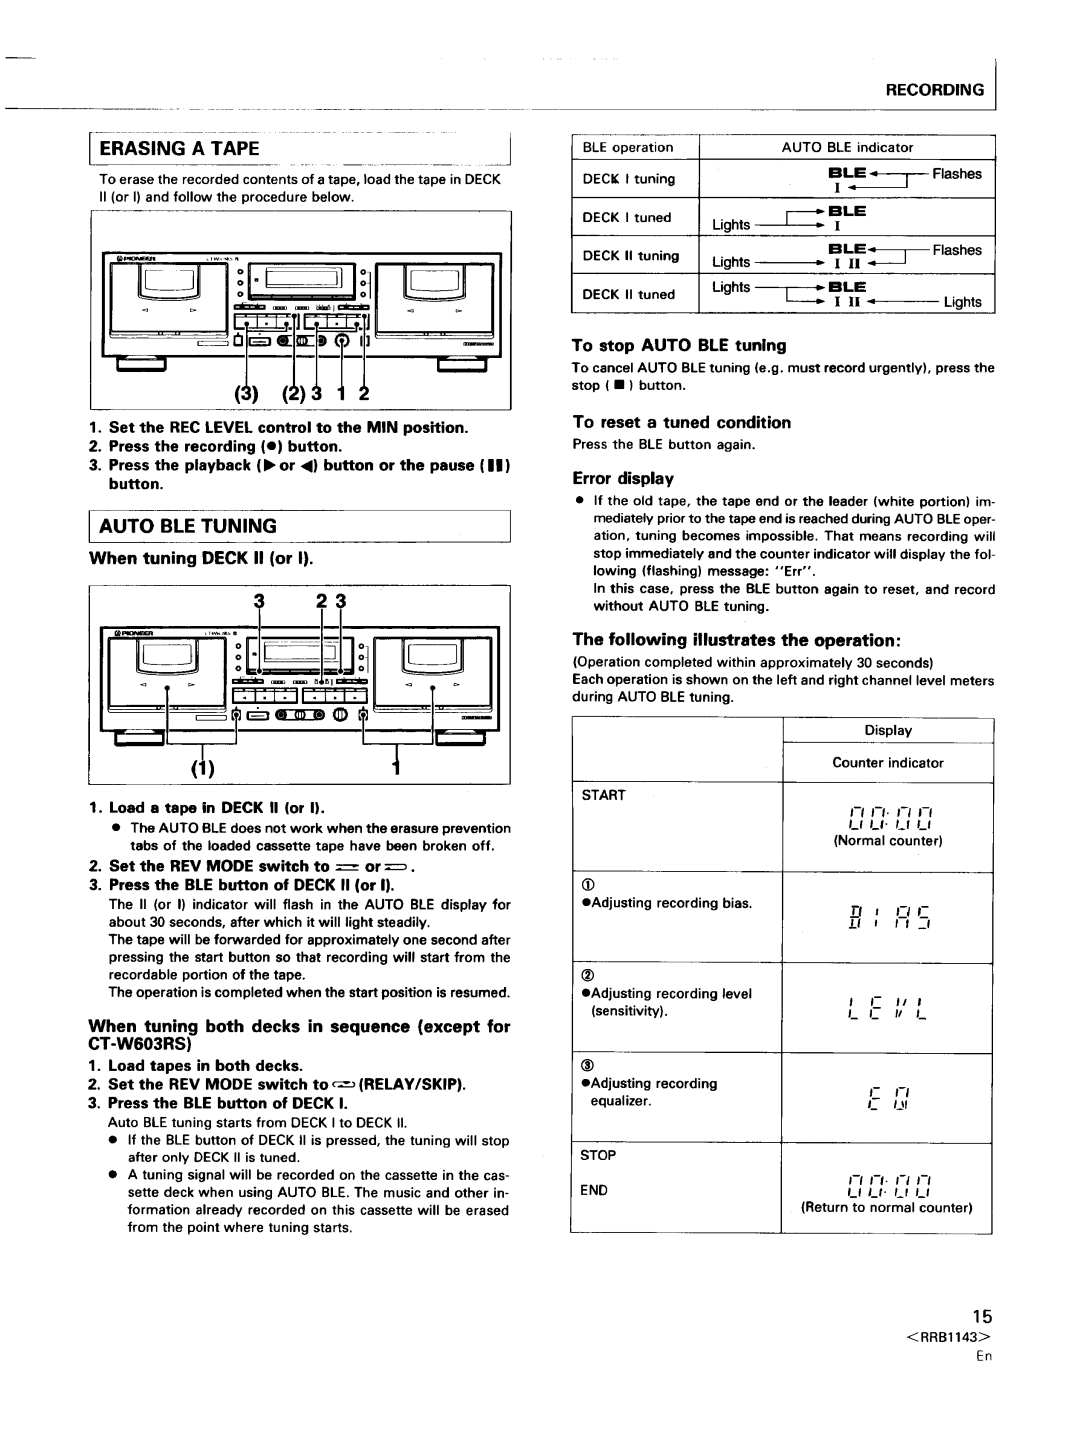 Pioneer CT-W603RS, CT-W803RS operating instructions 323, AUTO BLE TUNING When tuning DECK II or, Fi N, I-I J-I, lill 